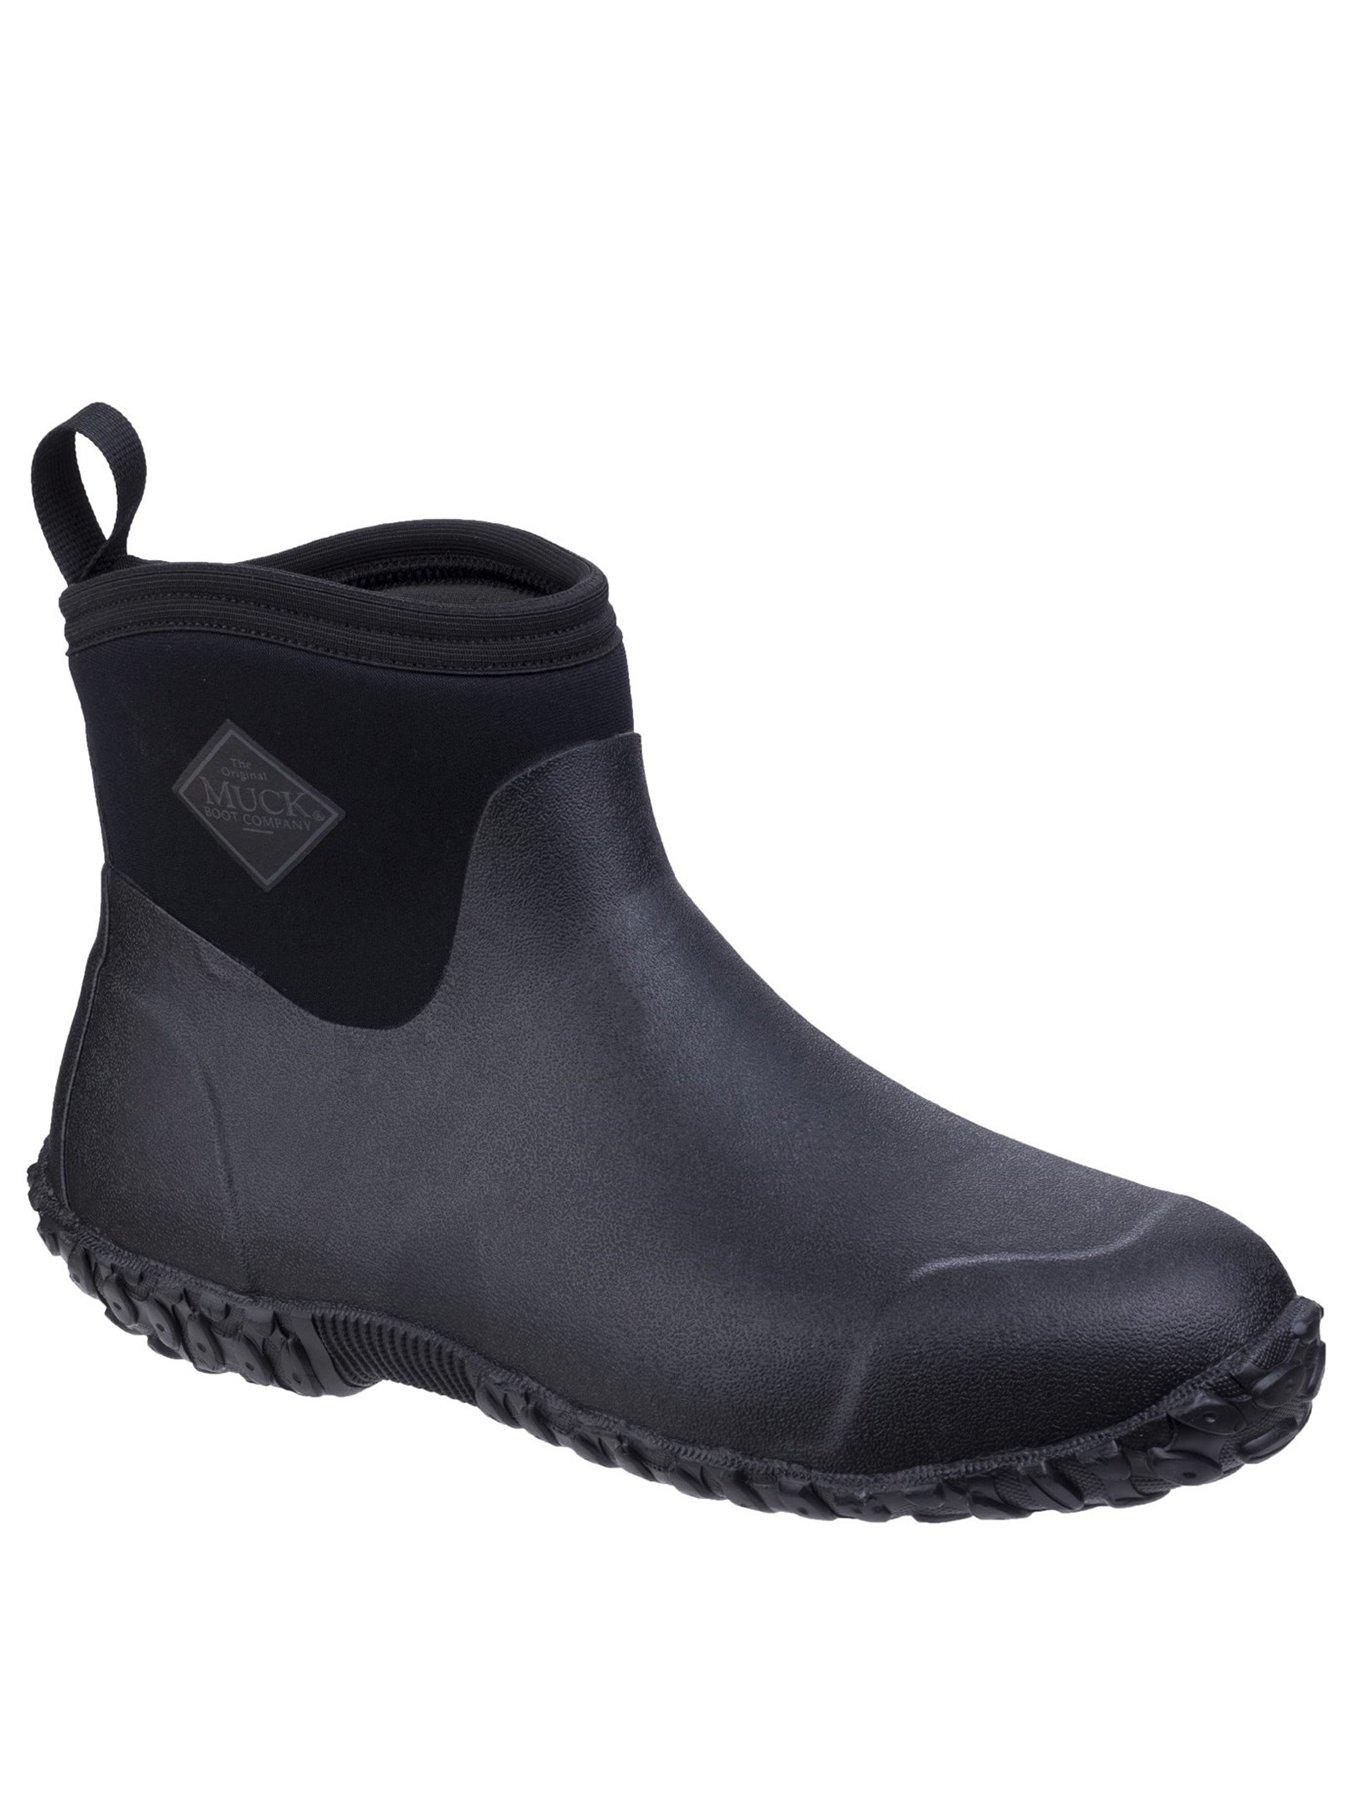 Muck Boots M's Muckster II Ankle Welly - Black | very.co.uk